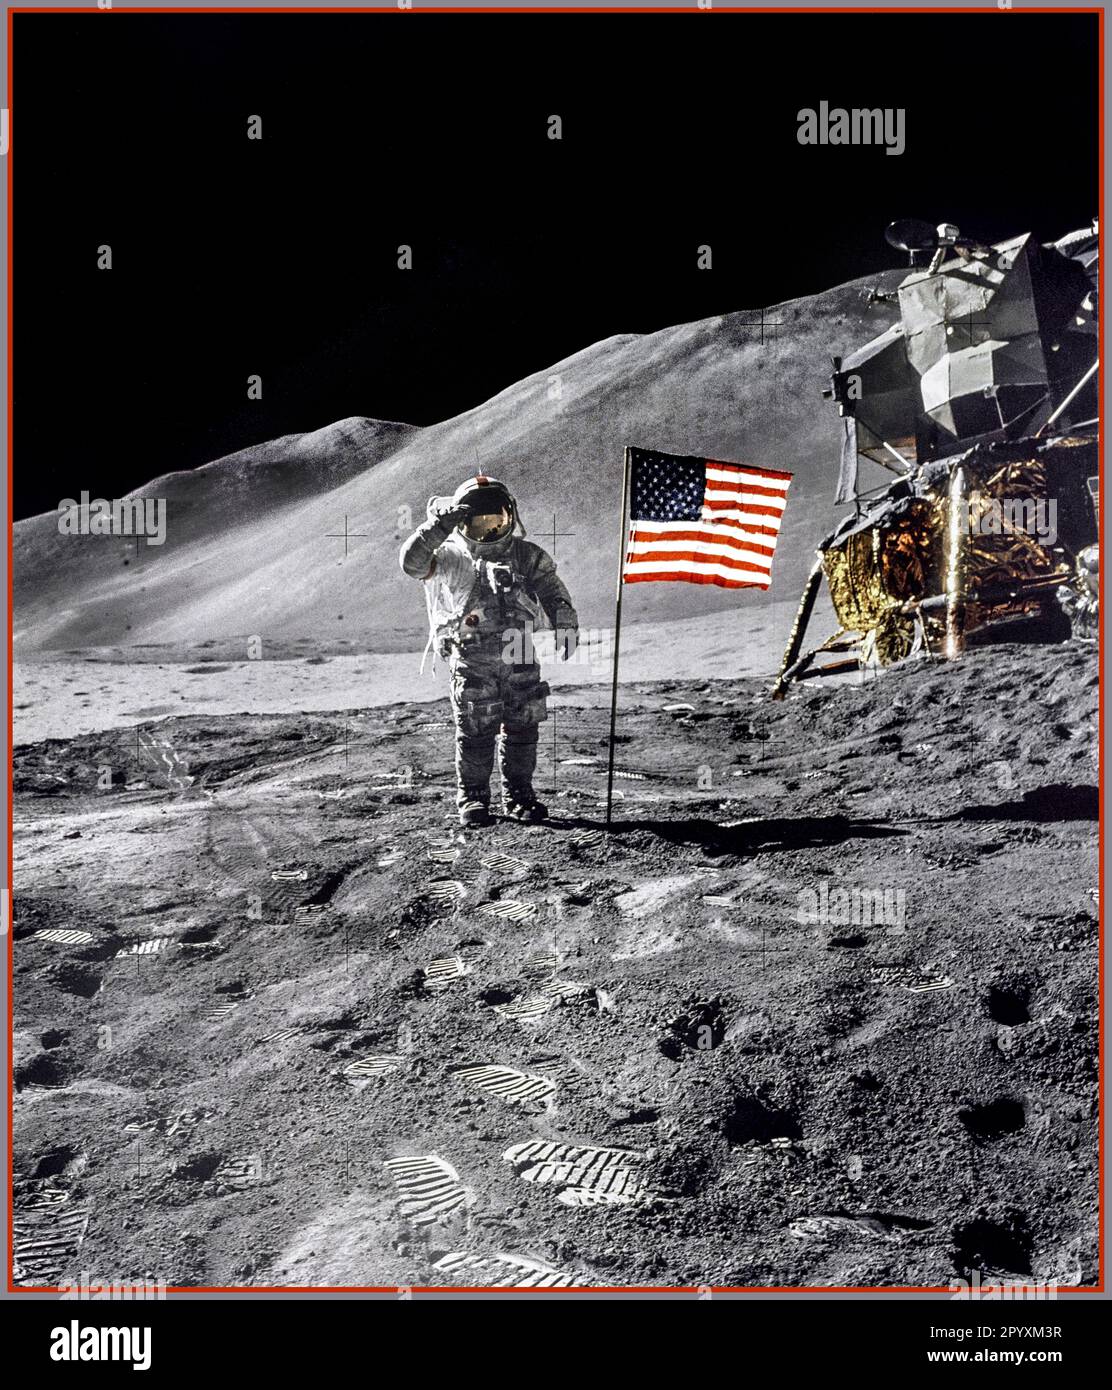 ON THE MOON Astronaut David R. Scott, commander, gives a military salute while standing beside the deployed U.S. flag during the Apollo 15 lunar surface extravehicular activity (EVA) at the Hadley-Apennine landing site. The flag was deployed toward the end of EVA-2. The Lunar Module 'Falcon' is partially visible on the right. Hadley Delta in the background rises approximately 4,000 meters (about 13,124 feet) above the plain. The base of the mountain is approximately 5 kilometers (about 3 statute miles) away. This photograph was taken by Astronaut James B. Irwin, Lunar Module pilot. Stock Photo